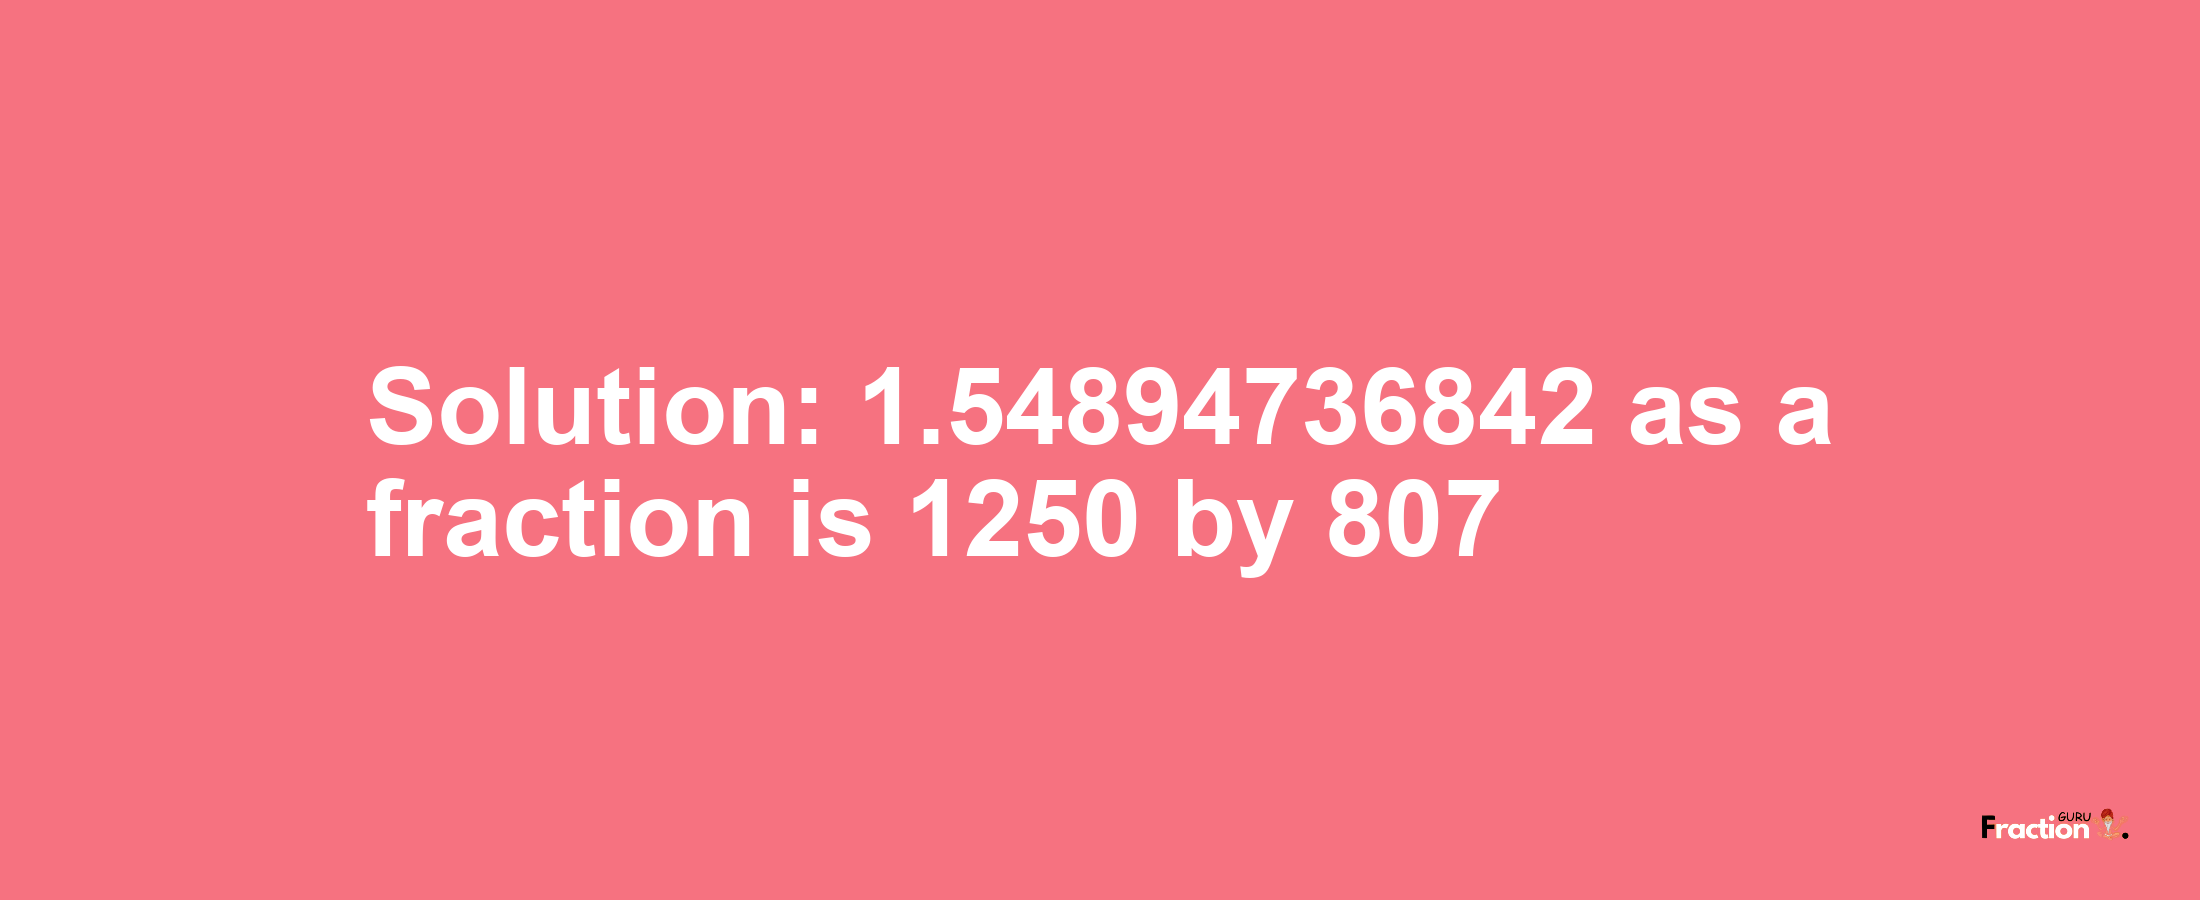 Solution:1.54894736842 as a fraction is 1250/807